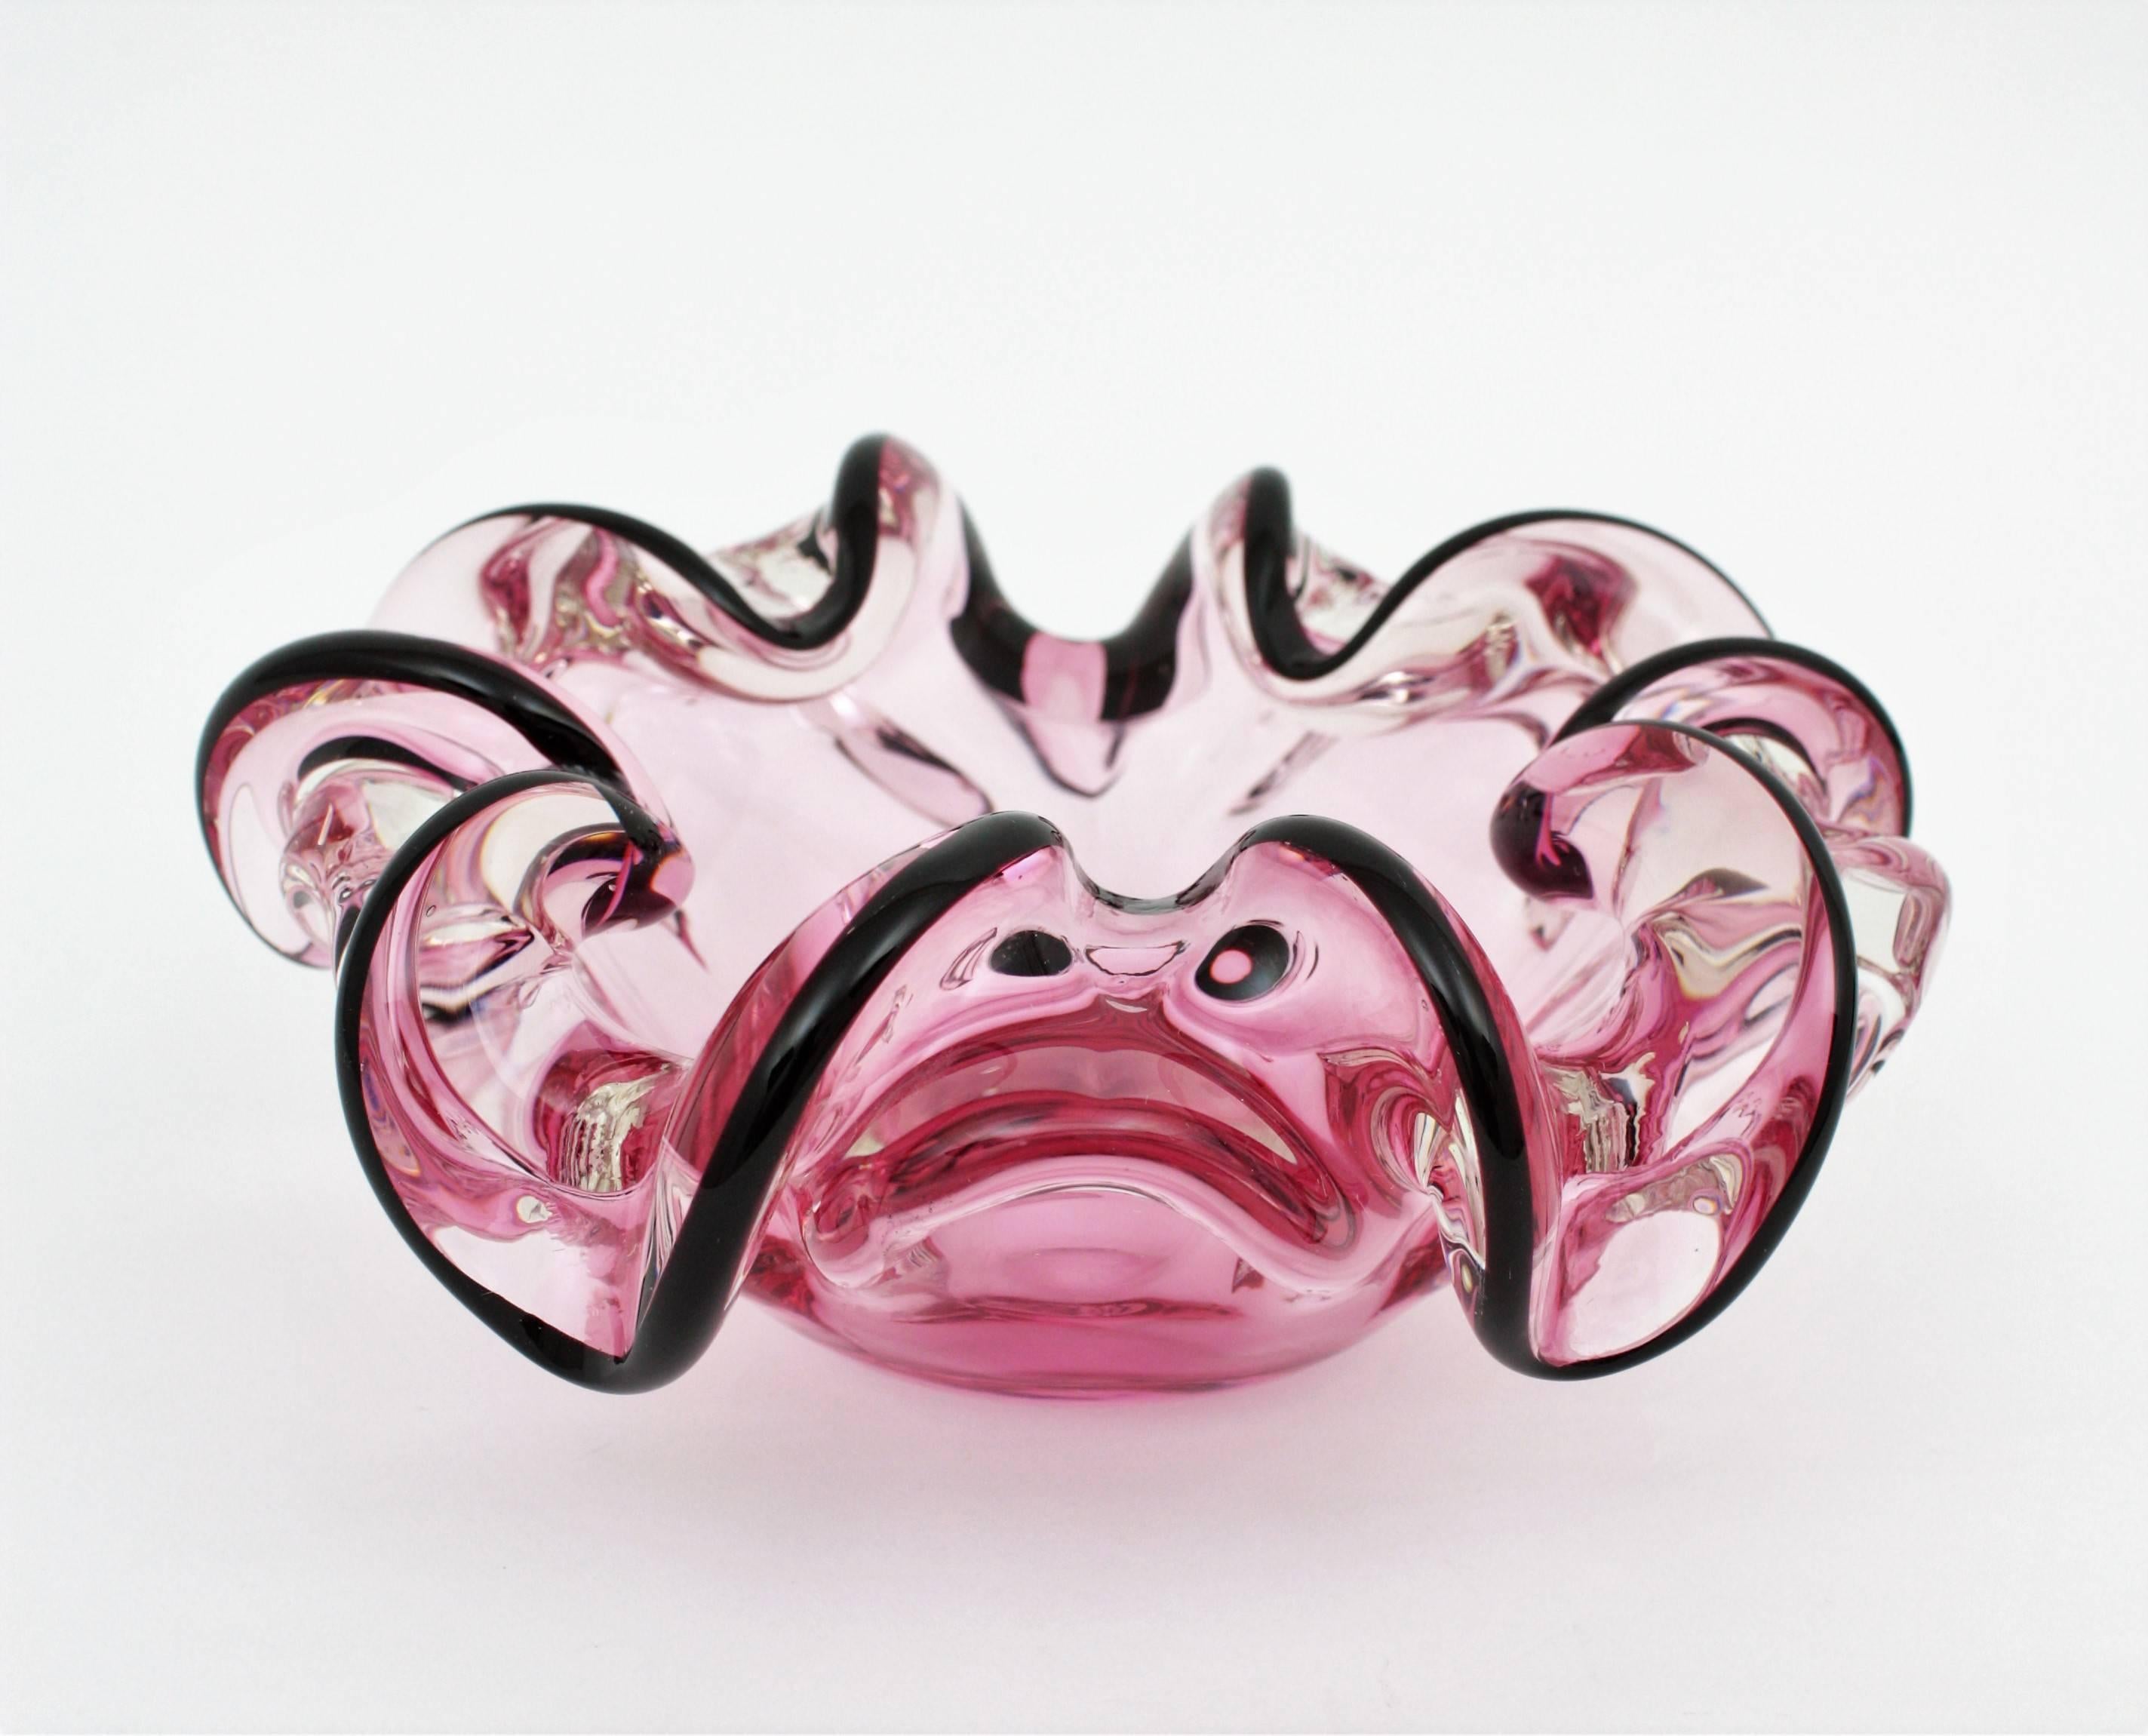 Gorgeous handblown Murano art glass bowl in pink and black colors. The black edge cased into pink glass and the large size make this Murano glass piece highly decorative. Lovely to be used as candy bowl, jewelry bowl or vide-poche, Italy